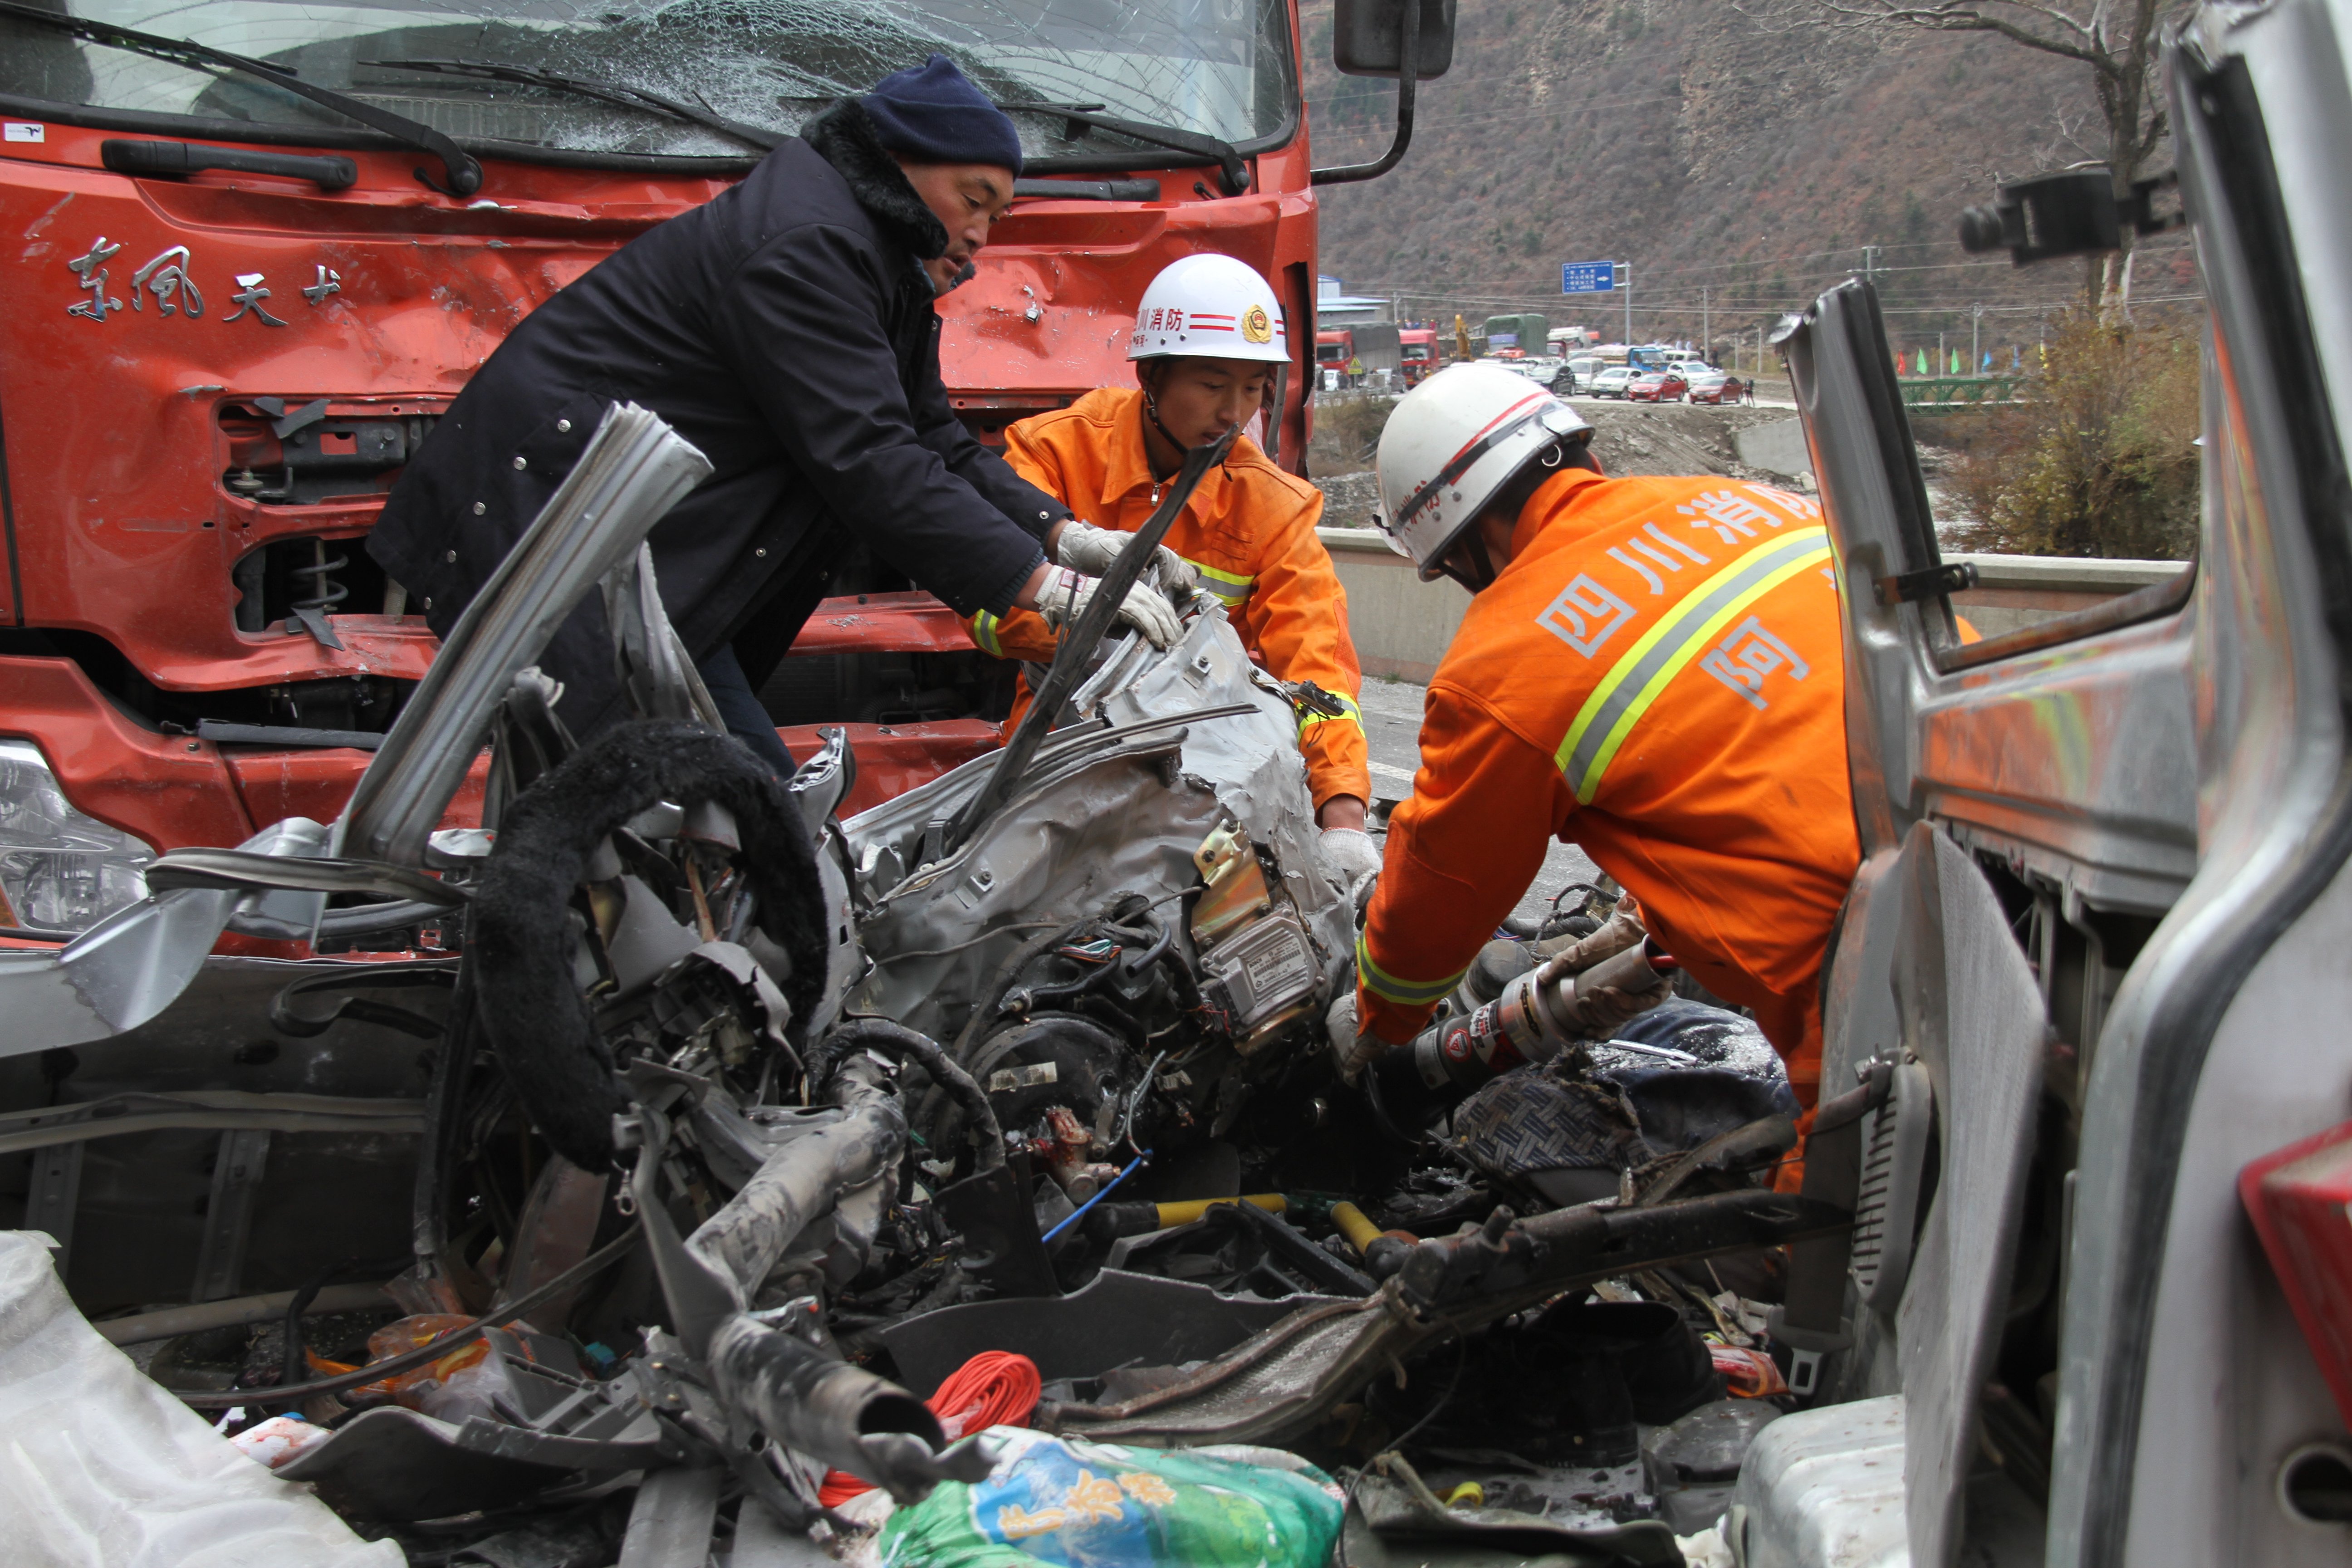 (141115) -- SONGPAN, Nov. 15, 2014 (Xinhua) -- Rescuers work at the site of a road accident on State Highway 213 in Anhong Township of Songpan County, southwest China's Sichuan Province, Nov. 15, 2014. A minibus collided with a truck in Songpan Saturday morning, causing three people dead on the spot and five others dead after treatment. (Xinhua) (lfj)